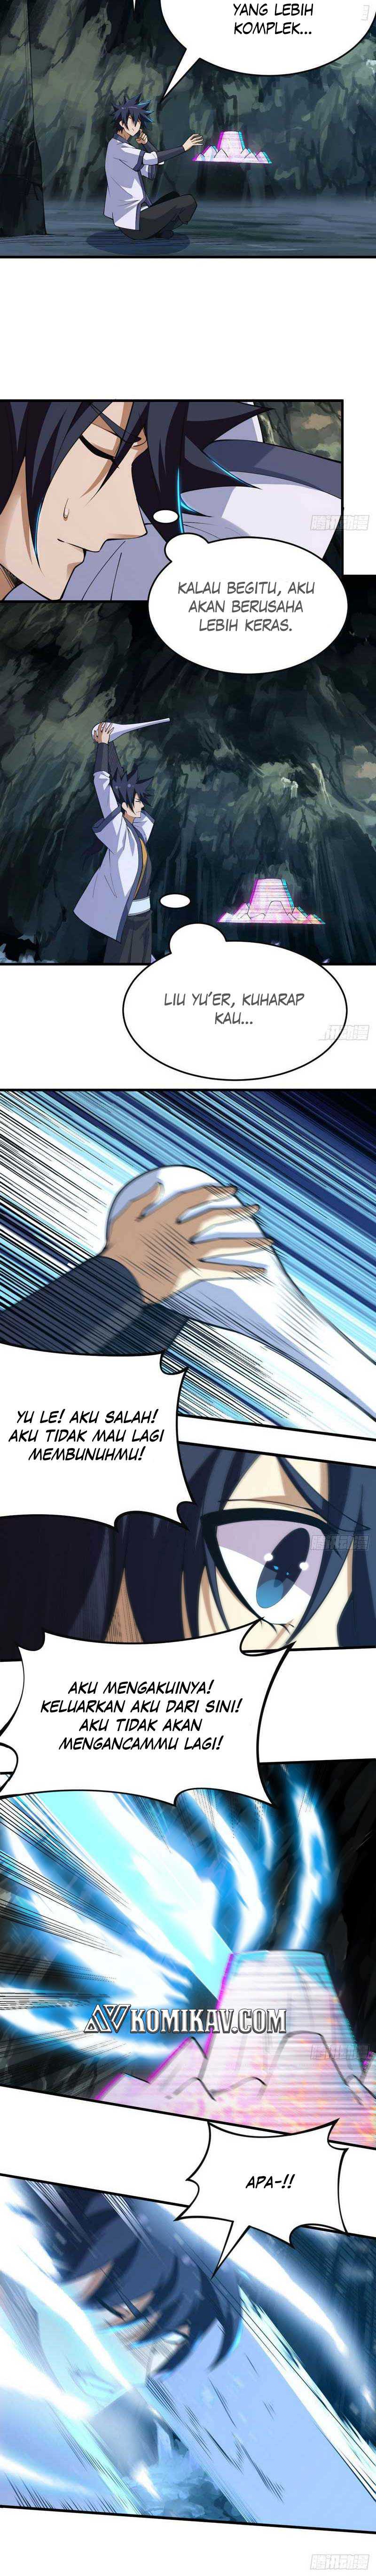 Dilarang COPAS - situs resmi www.mangacanblog.com - Komik i just want to be beaten to death by everyone 073 - chapter 73 74 Indonesia i just want to be beaten to death by everyone 073 - chapter 73 Terbaru 2|Baca Manga Komik Indonesia|Mangacan